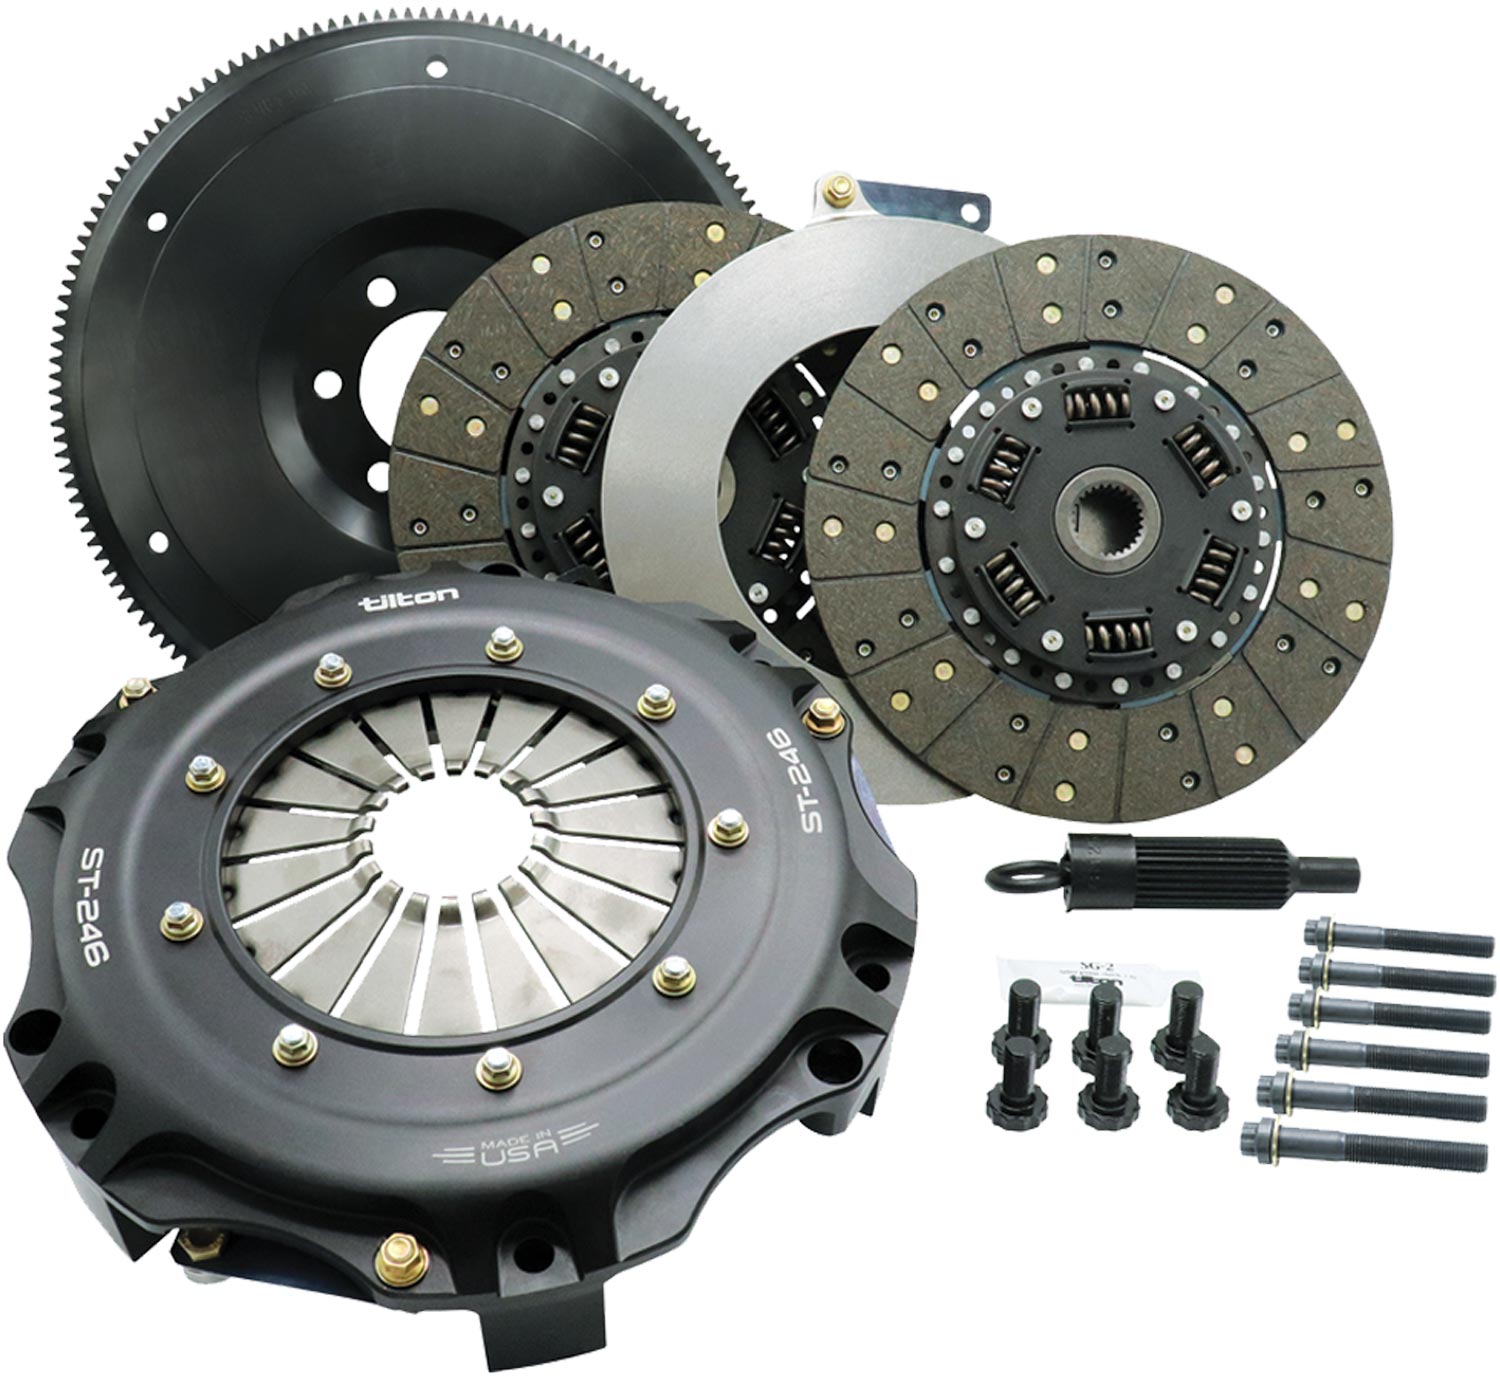 pieces from the ST-246 line of twin-disc clutch kits